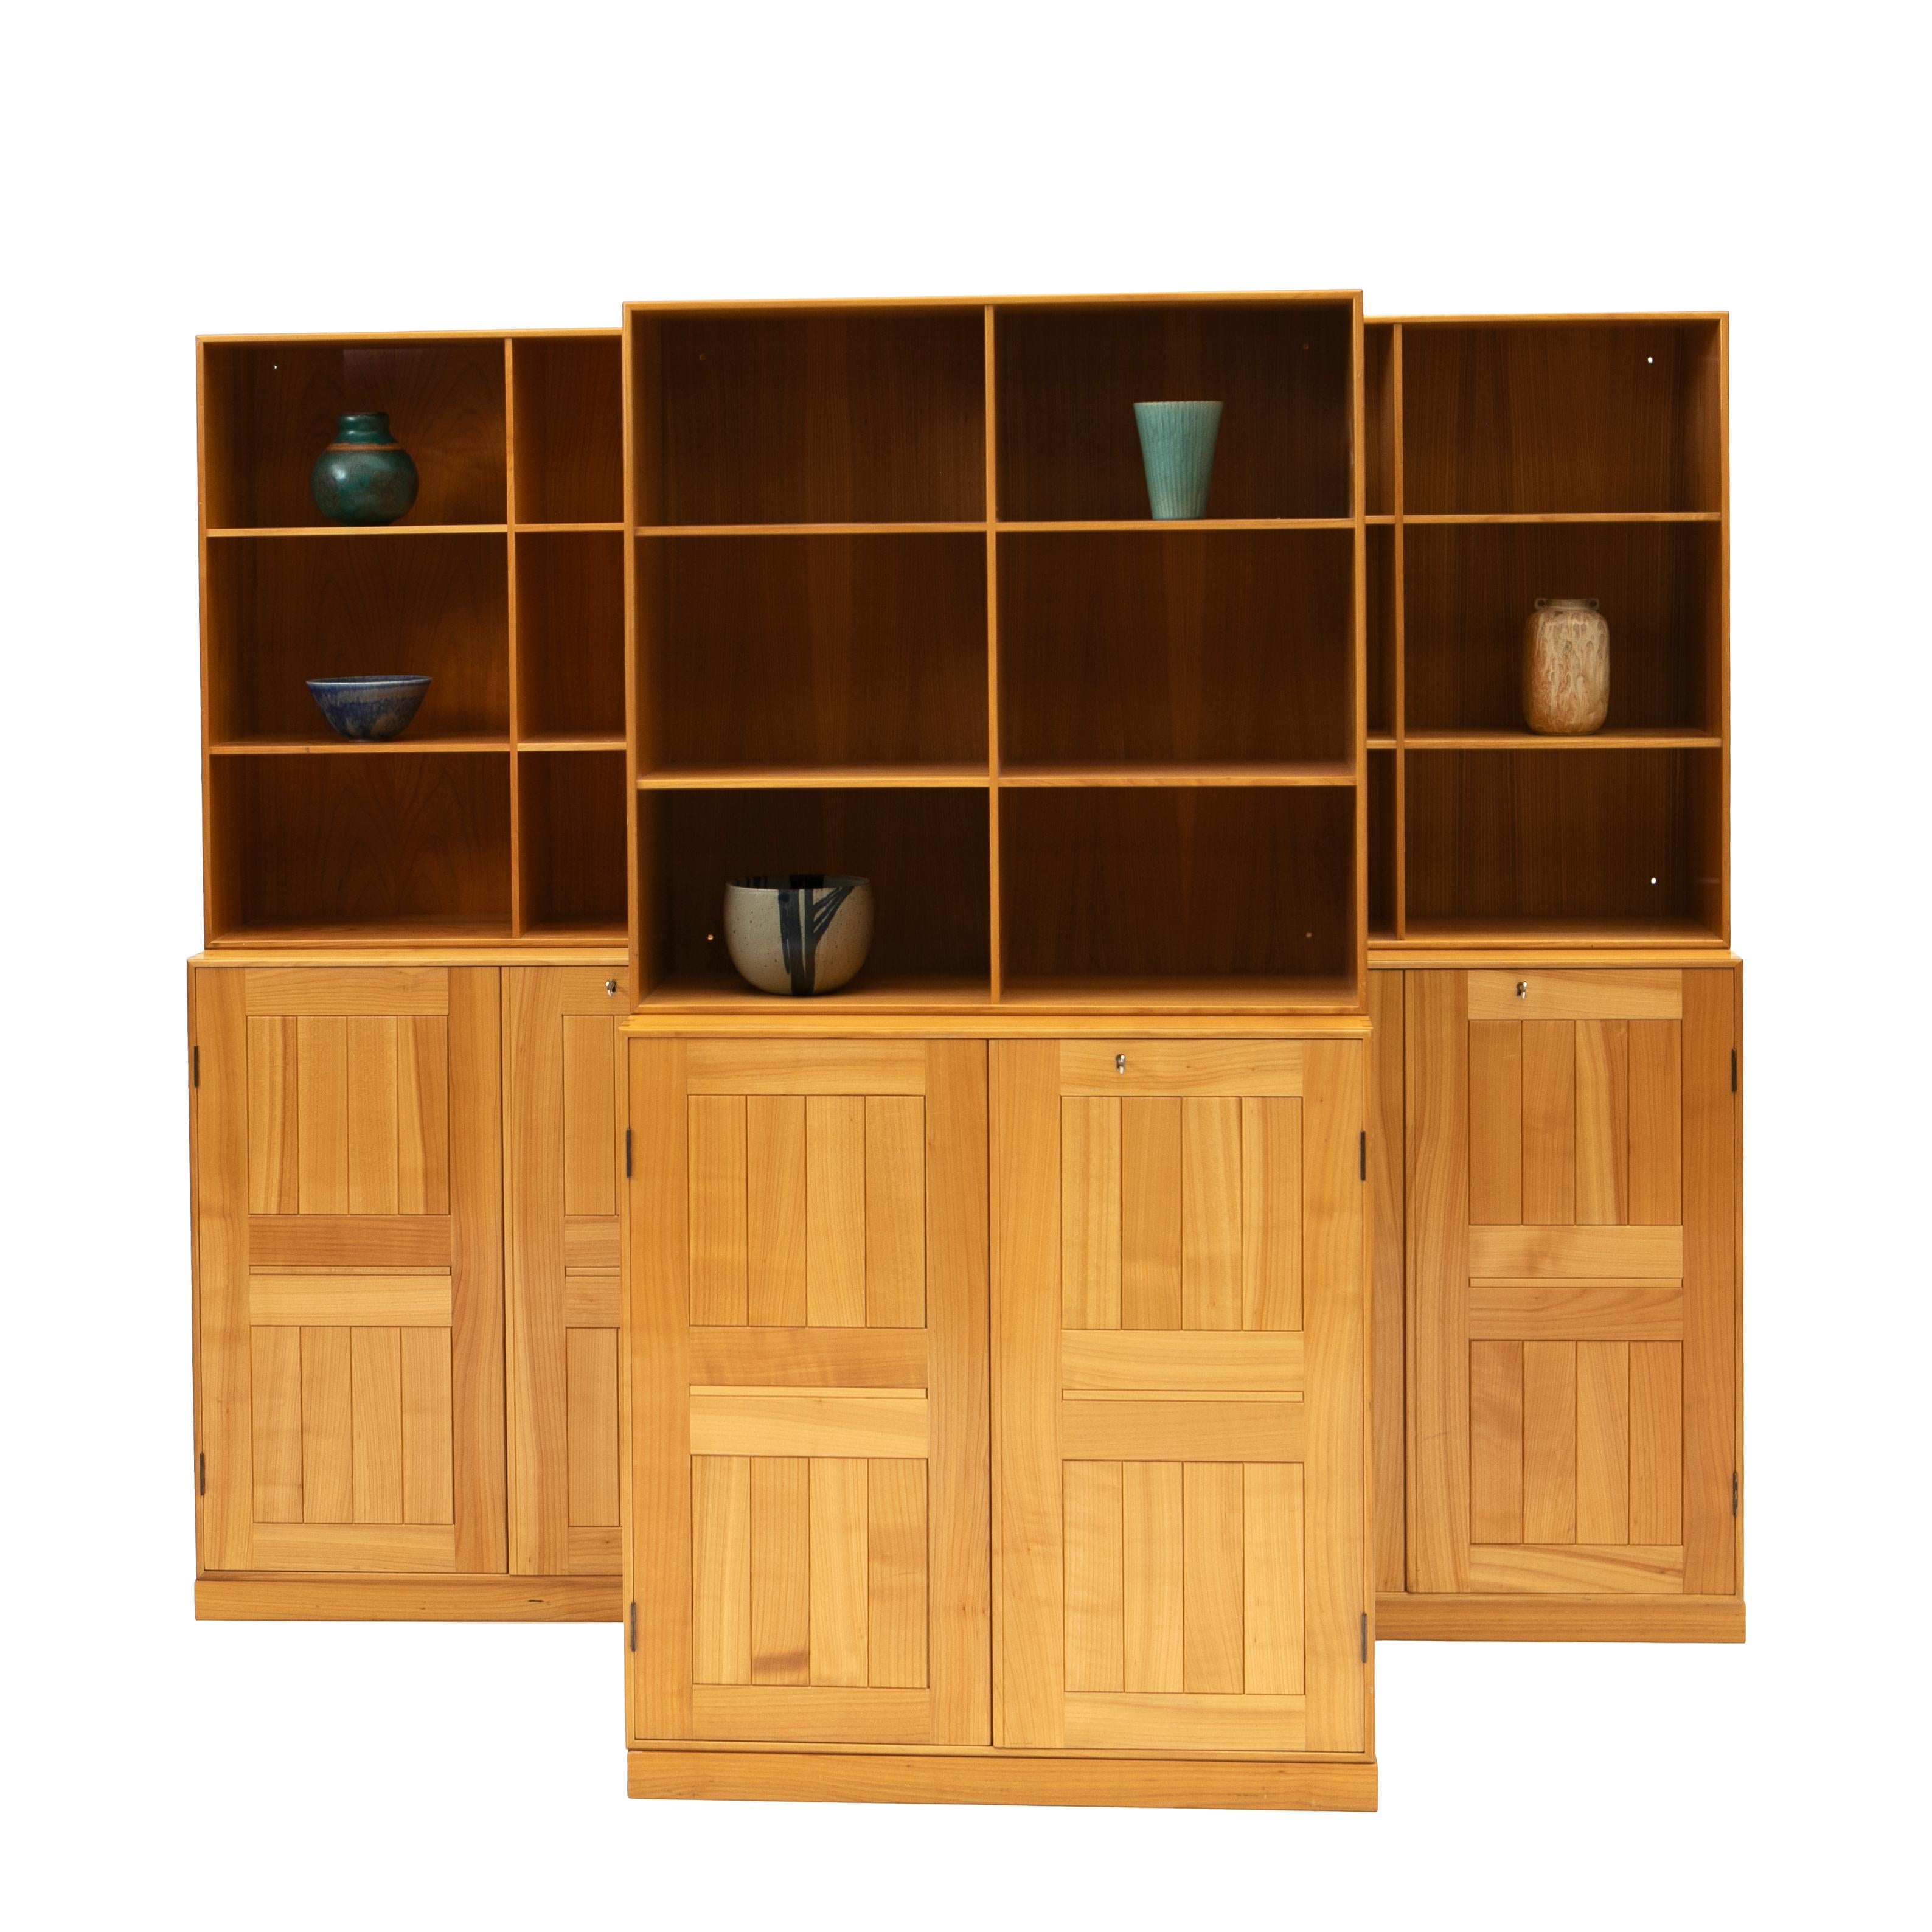 Mogens Koch, 1898-1992,.

Mogens Koch storage system in ash manufactured by Rud. Rasmussen, 1960's.
Set of three cabinets and three bookcases in patinated solid elm on three bases. Reverse with paper labels.
In untouched good condition with a